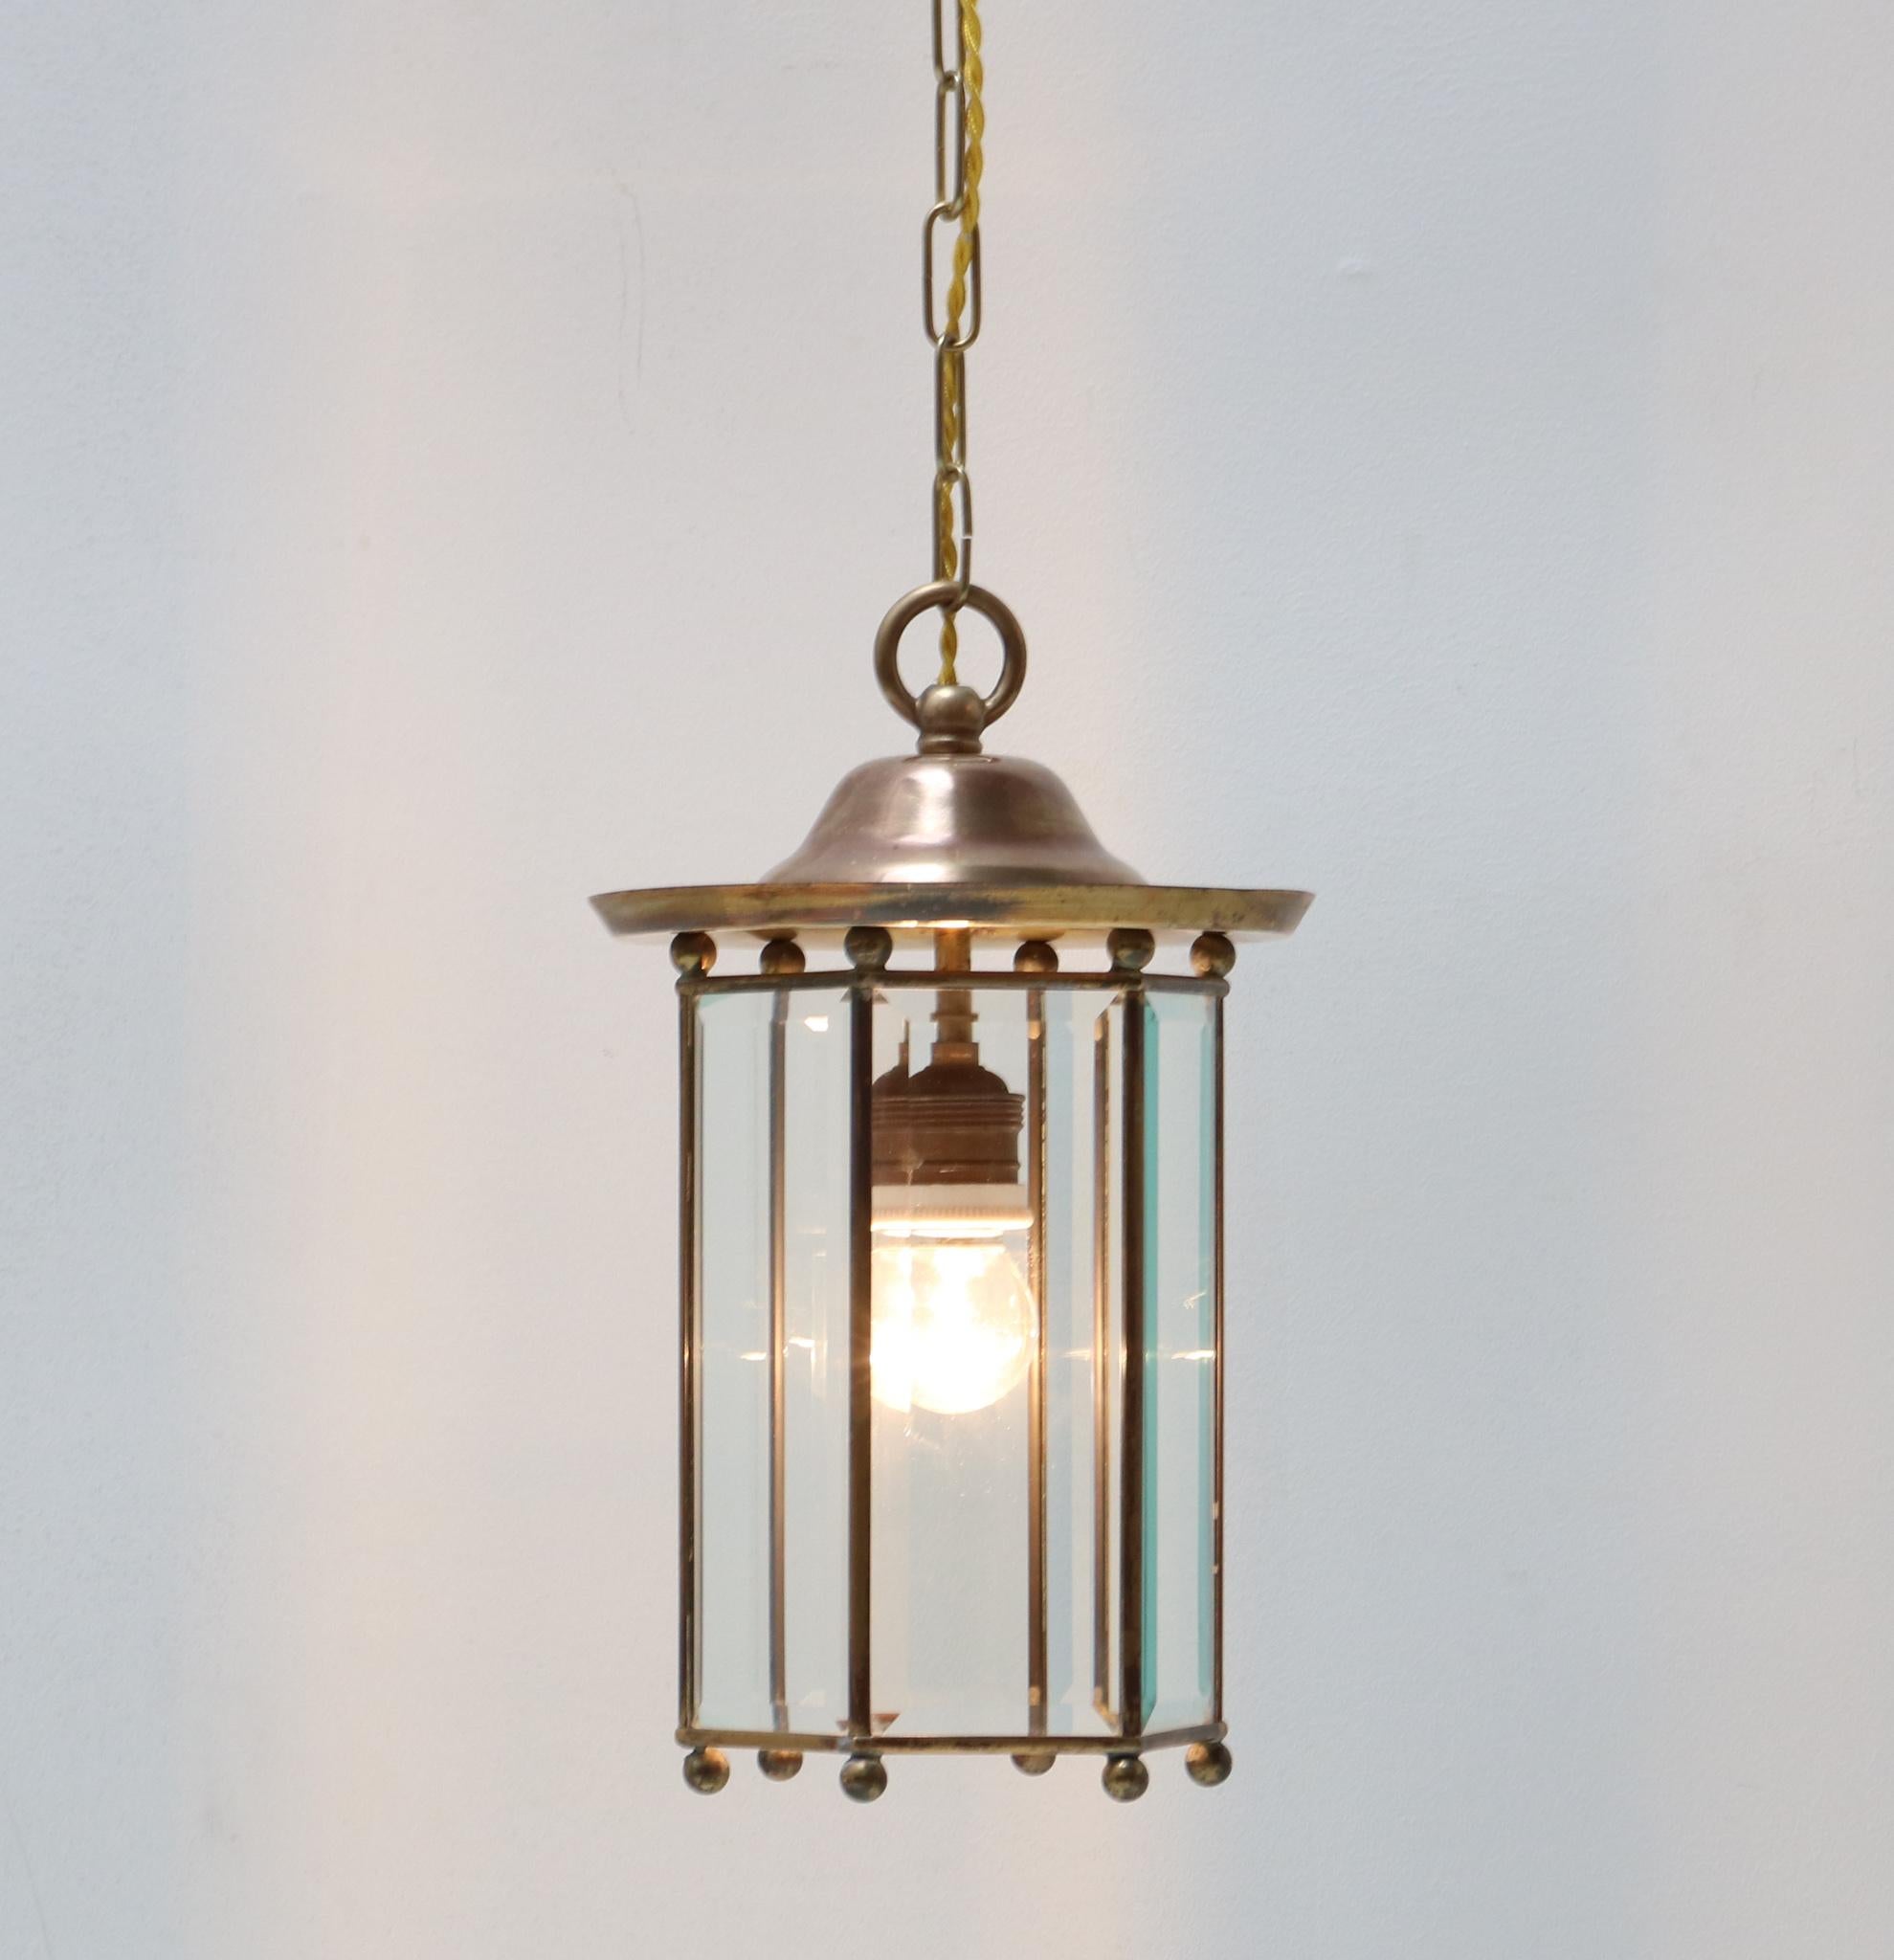 Early 20th Century Brass Art Nouveau Lantern with Glass, 1900s For Sale